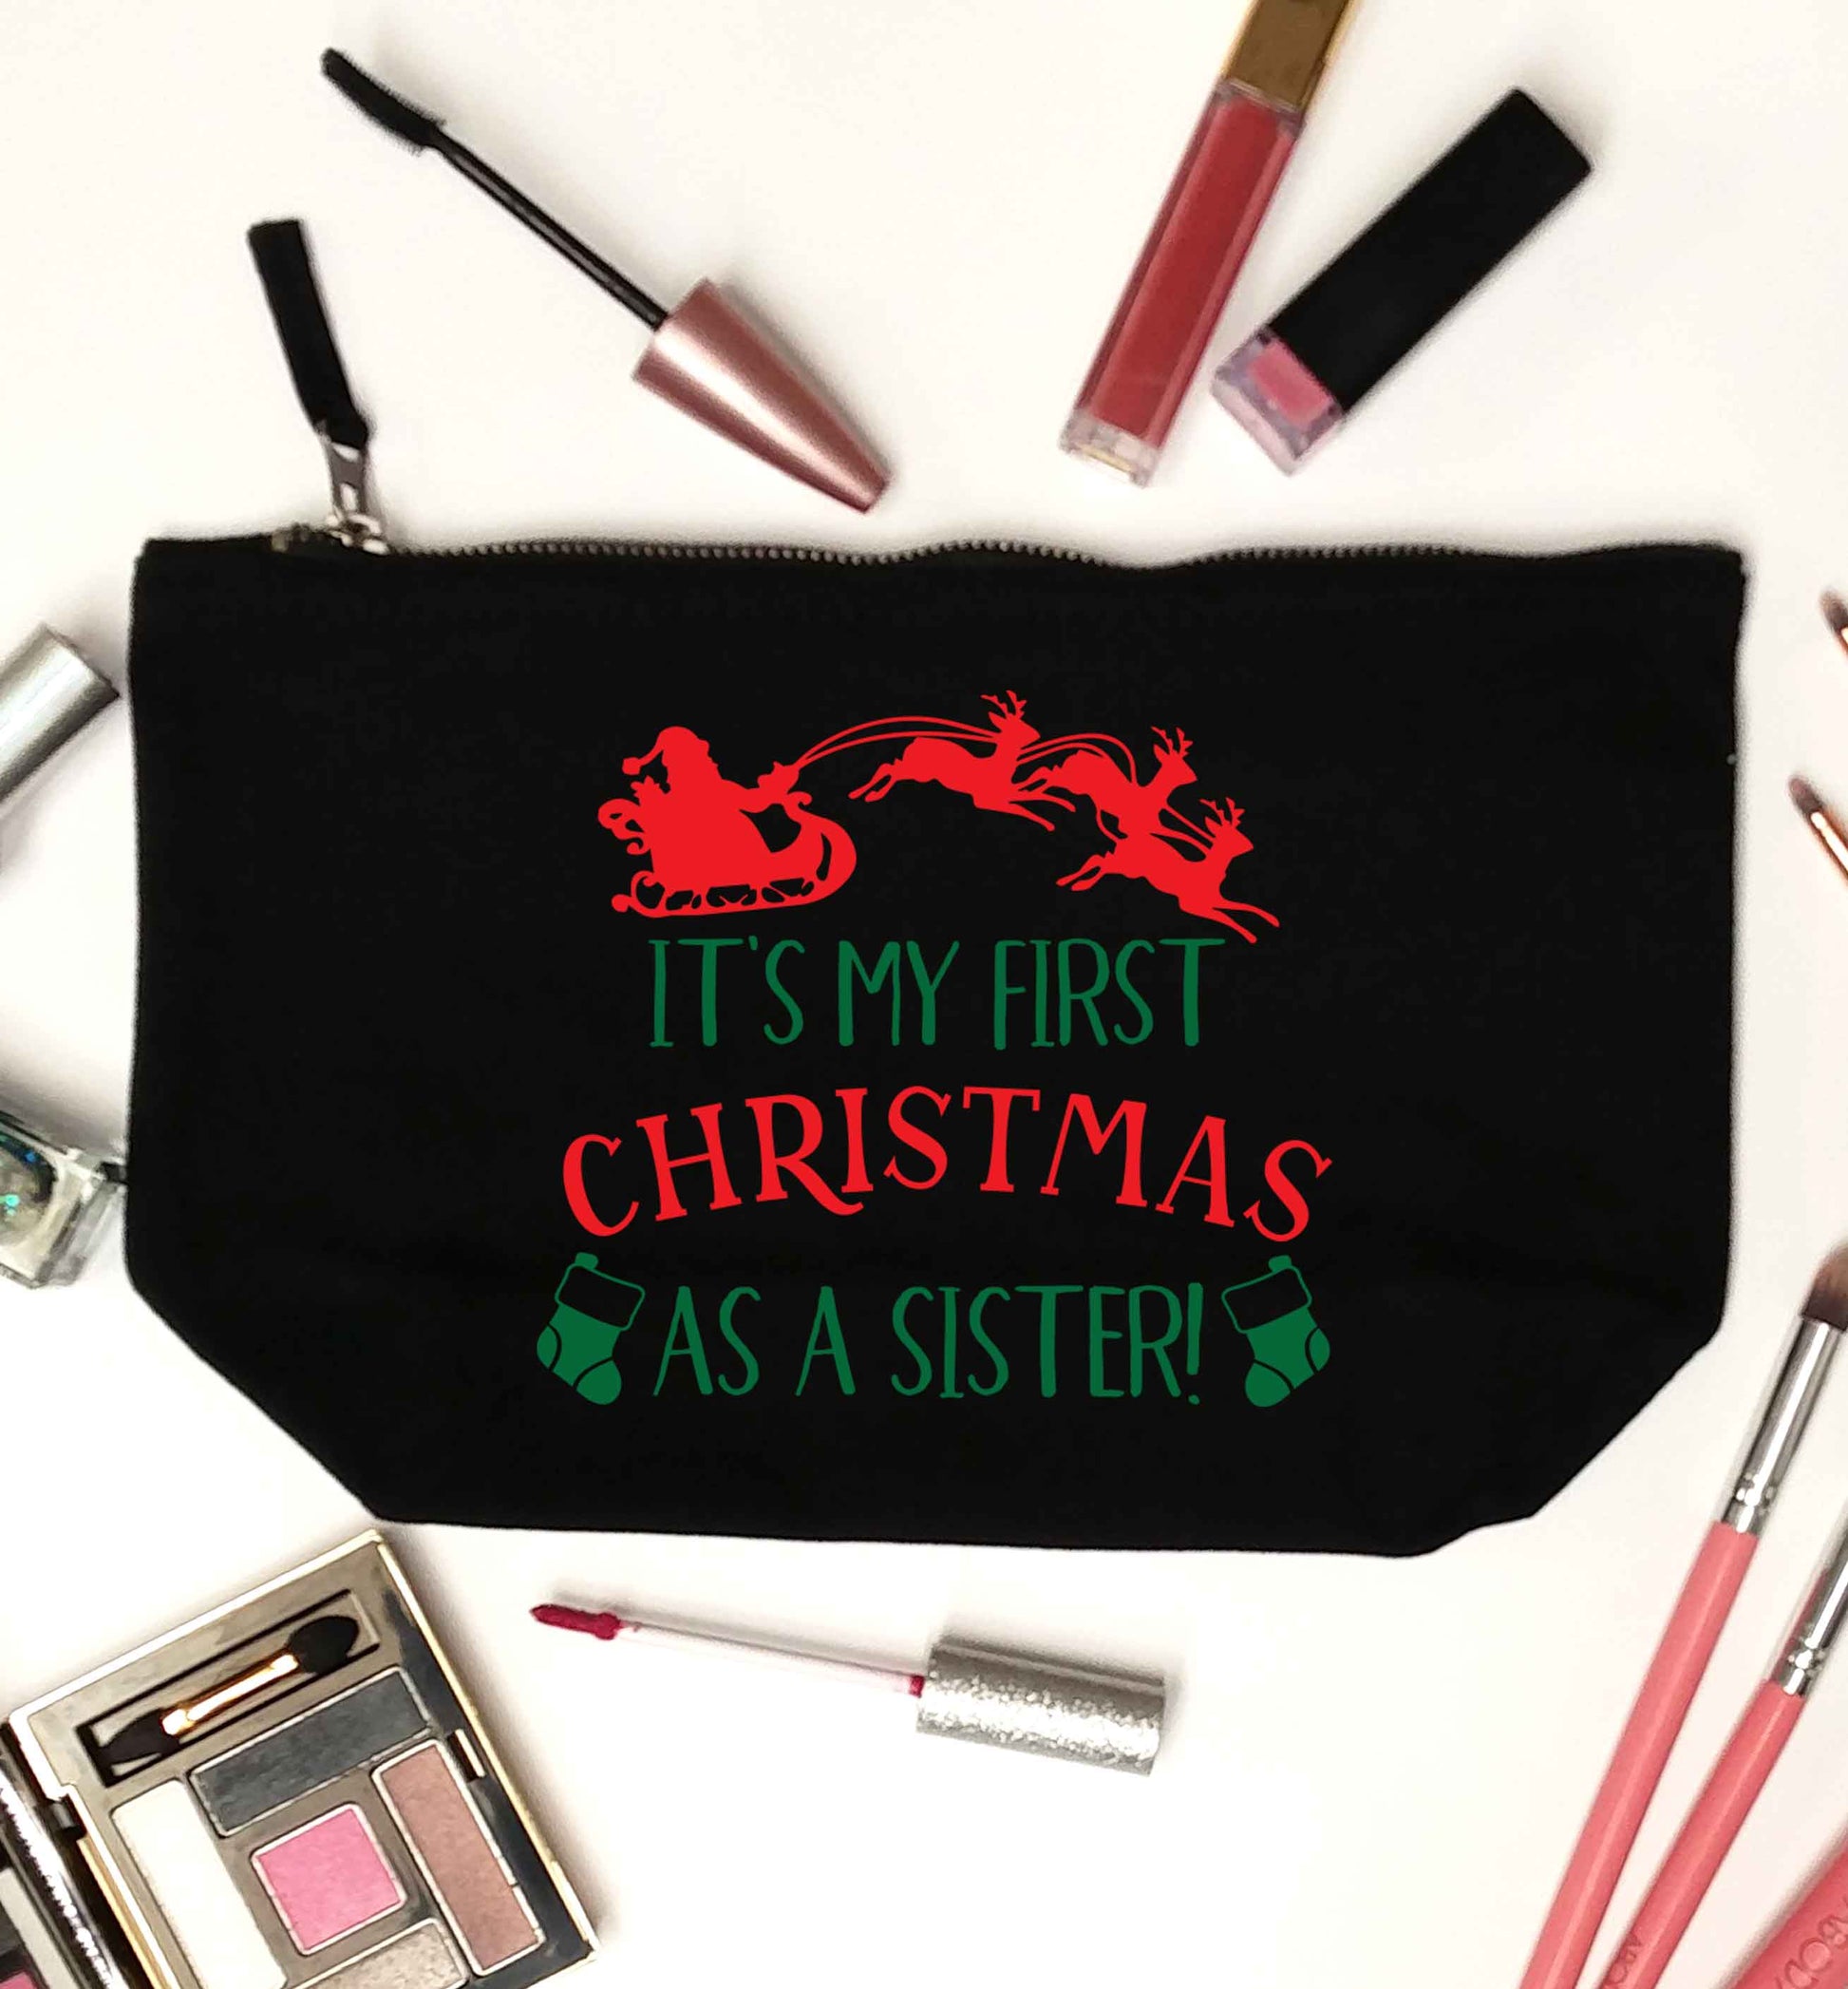 It's my first Christmas as a sister! black makeup bag